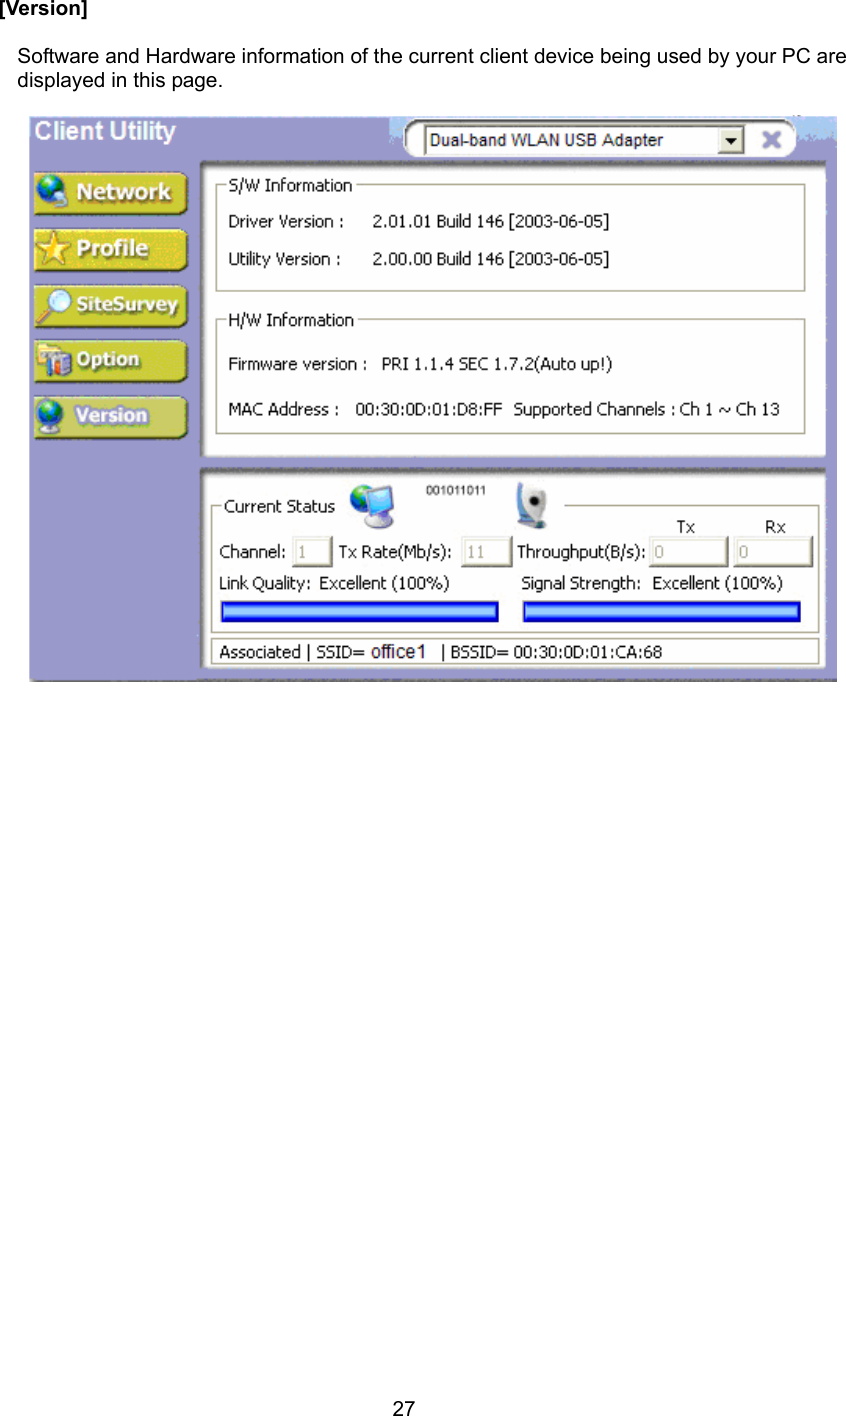  27  [Version]  Software and Hardware information of the current client device being used by your PC are displayed in this page.               